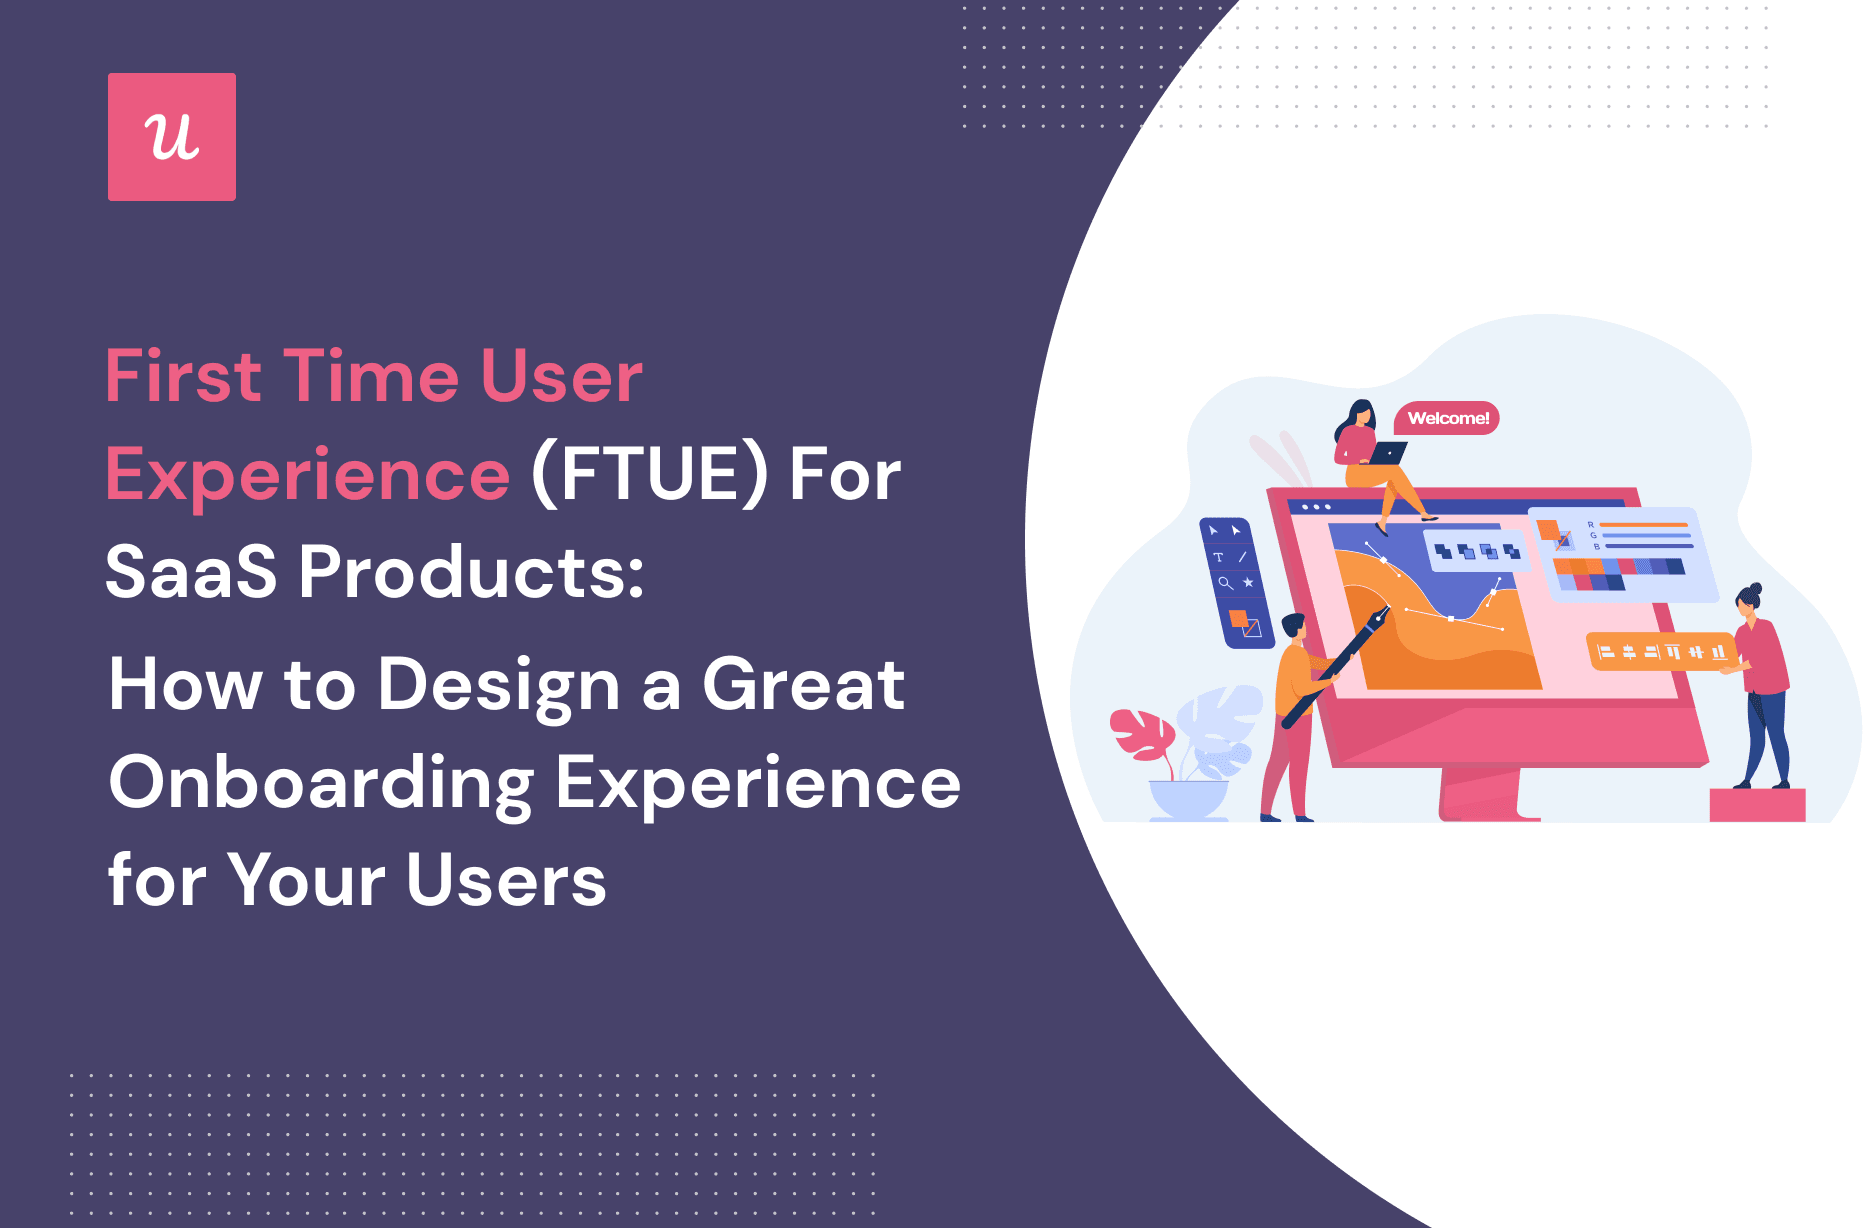 First Time User Experience (FTUE) For SaaS Products: How to Design a Great Onboarding Experience For Your Users